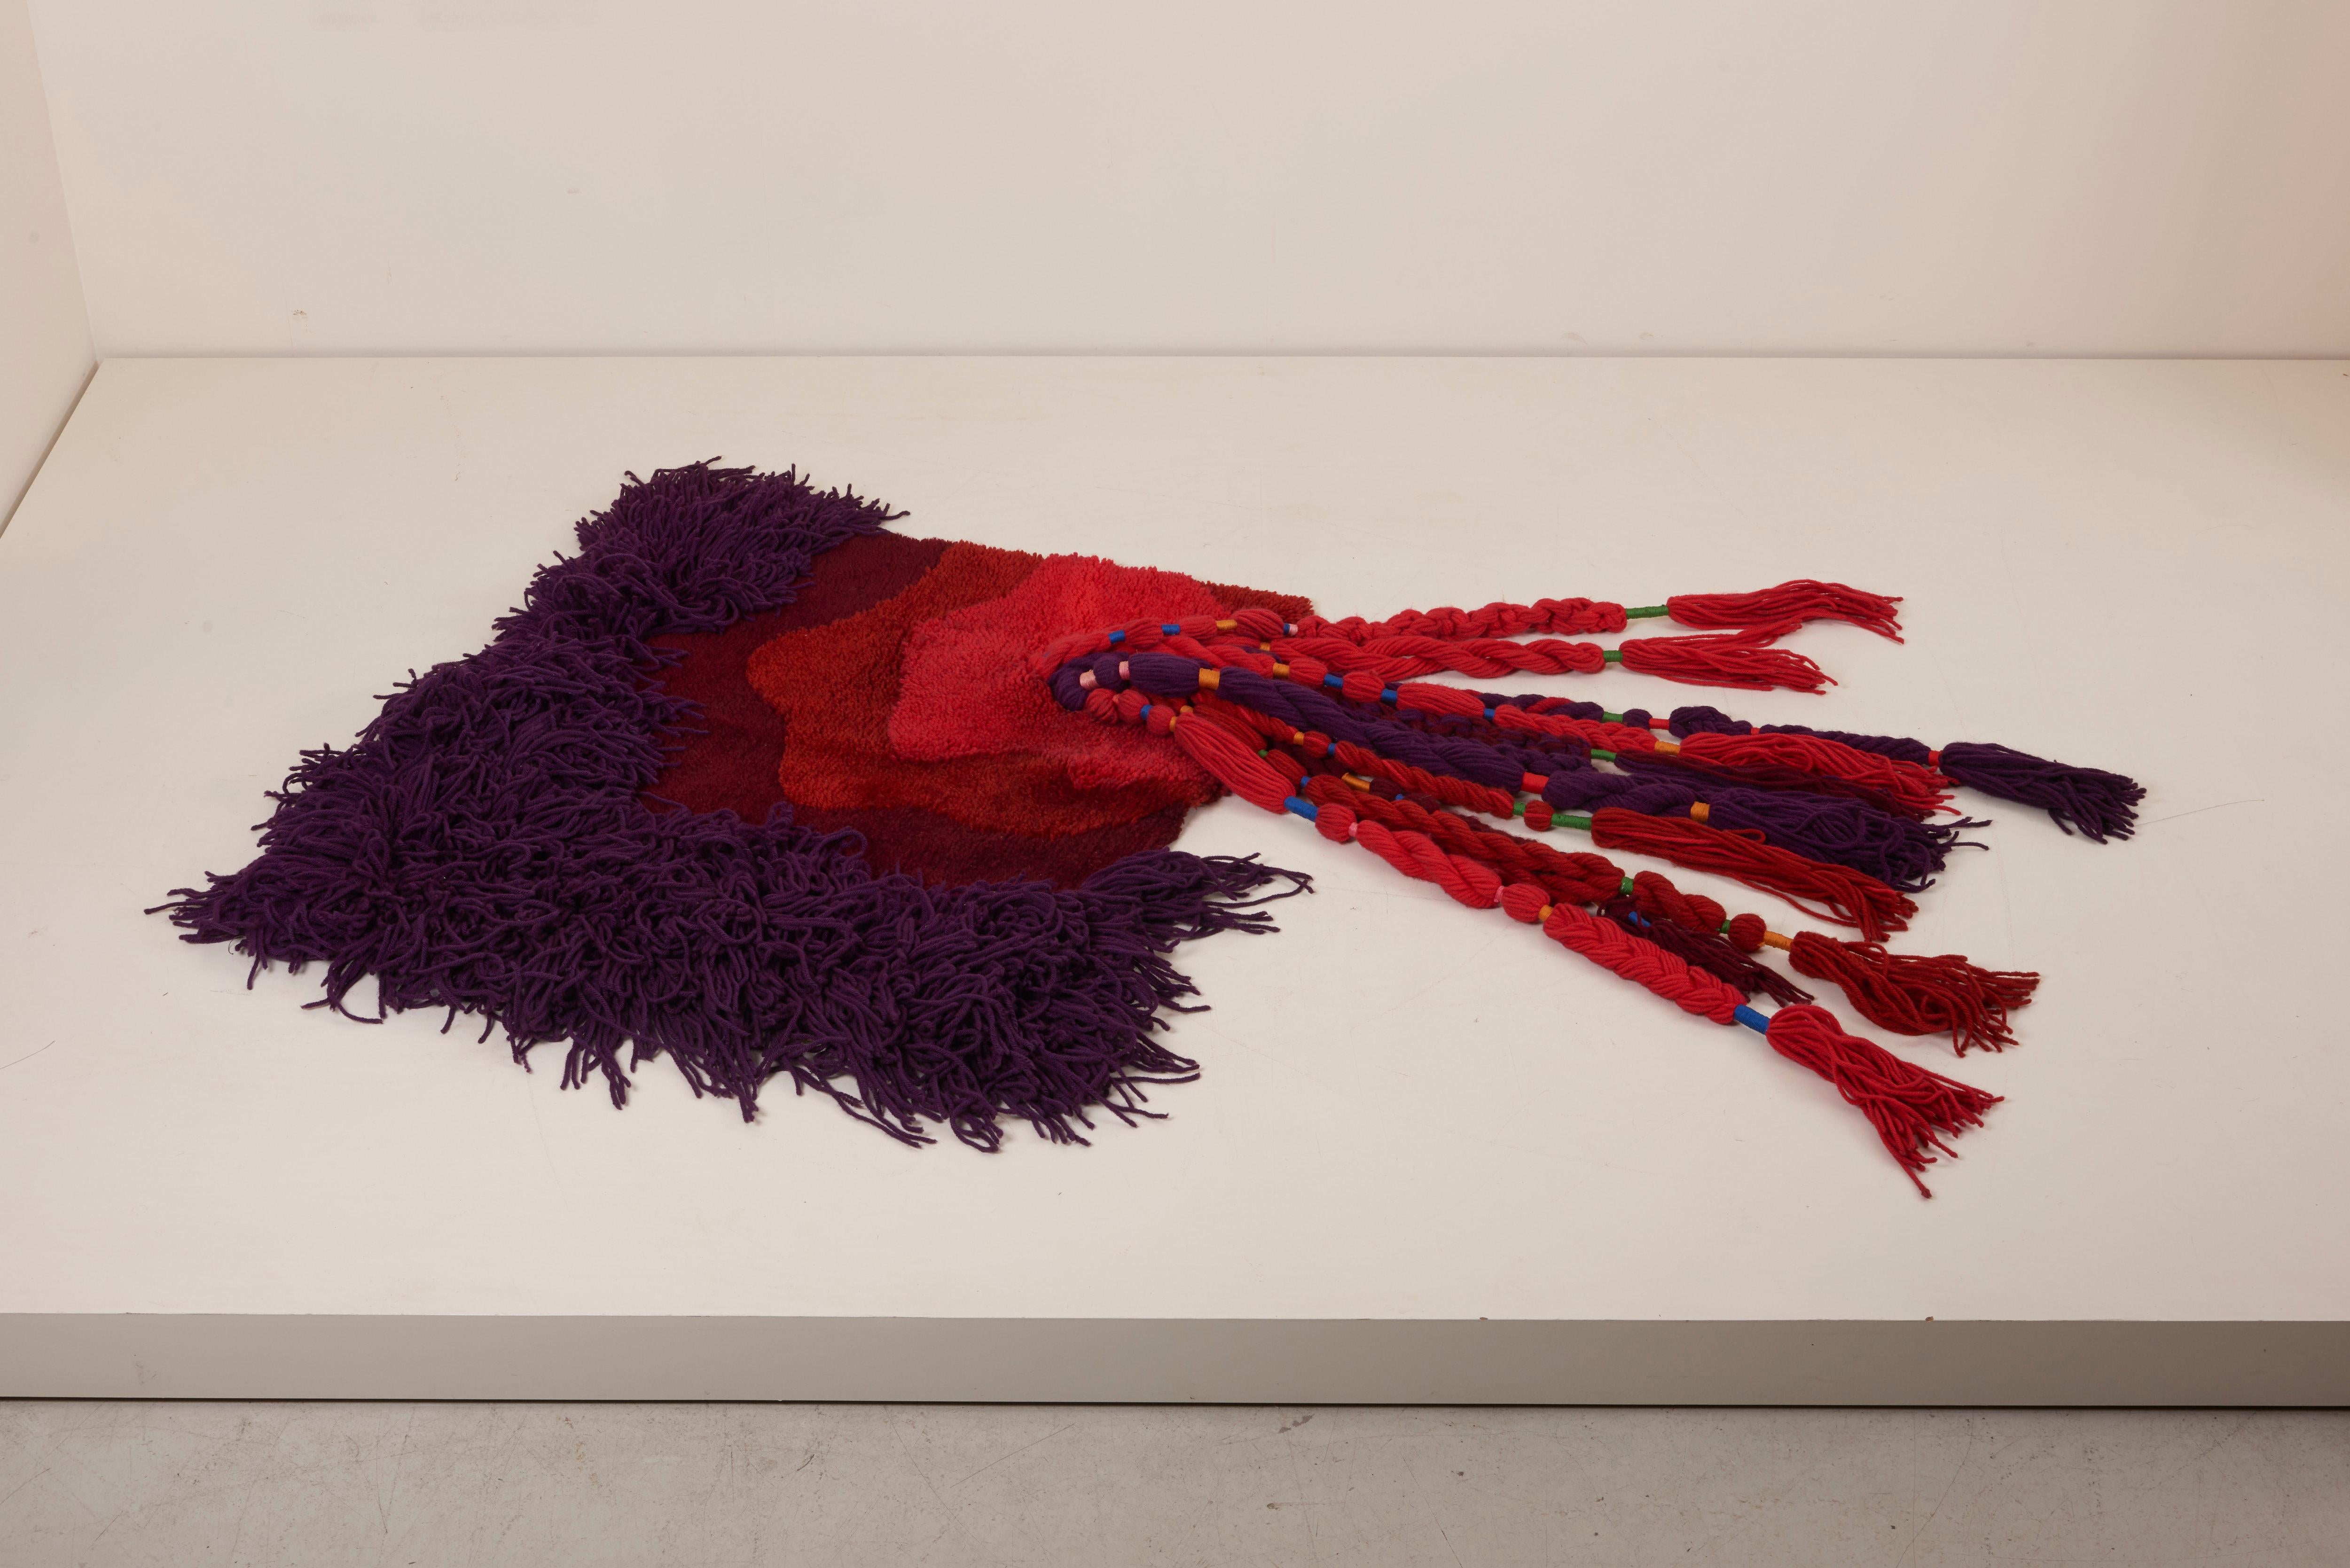 Ewald Kröner designed woollen wall hanging.
An example of the Pop art movement of the early 1970s.
It features wool tassel hanging loosely with tied bands.